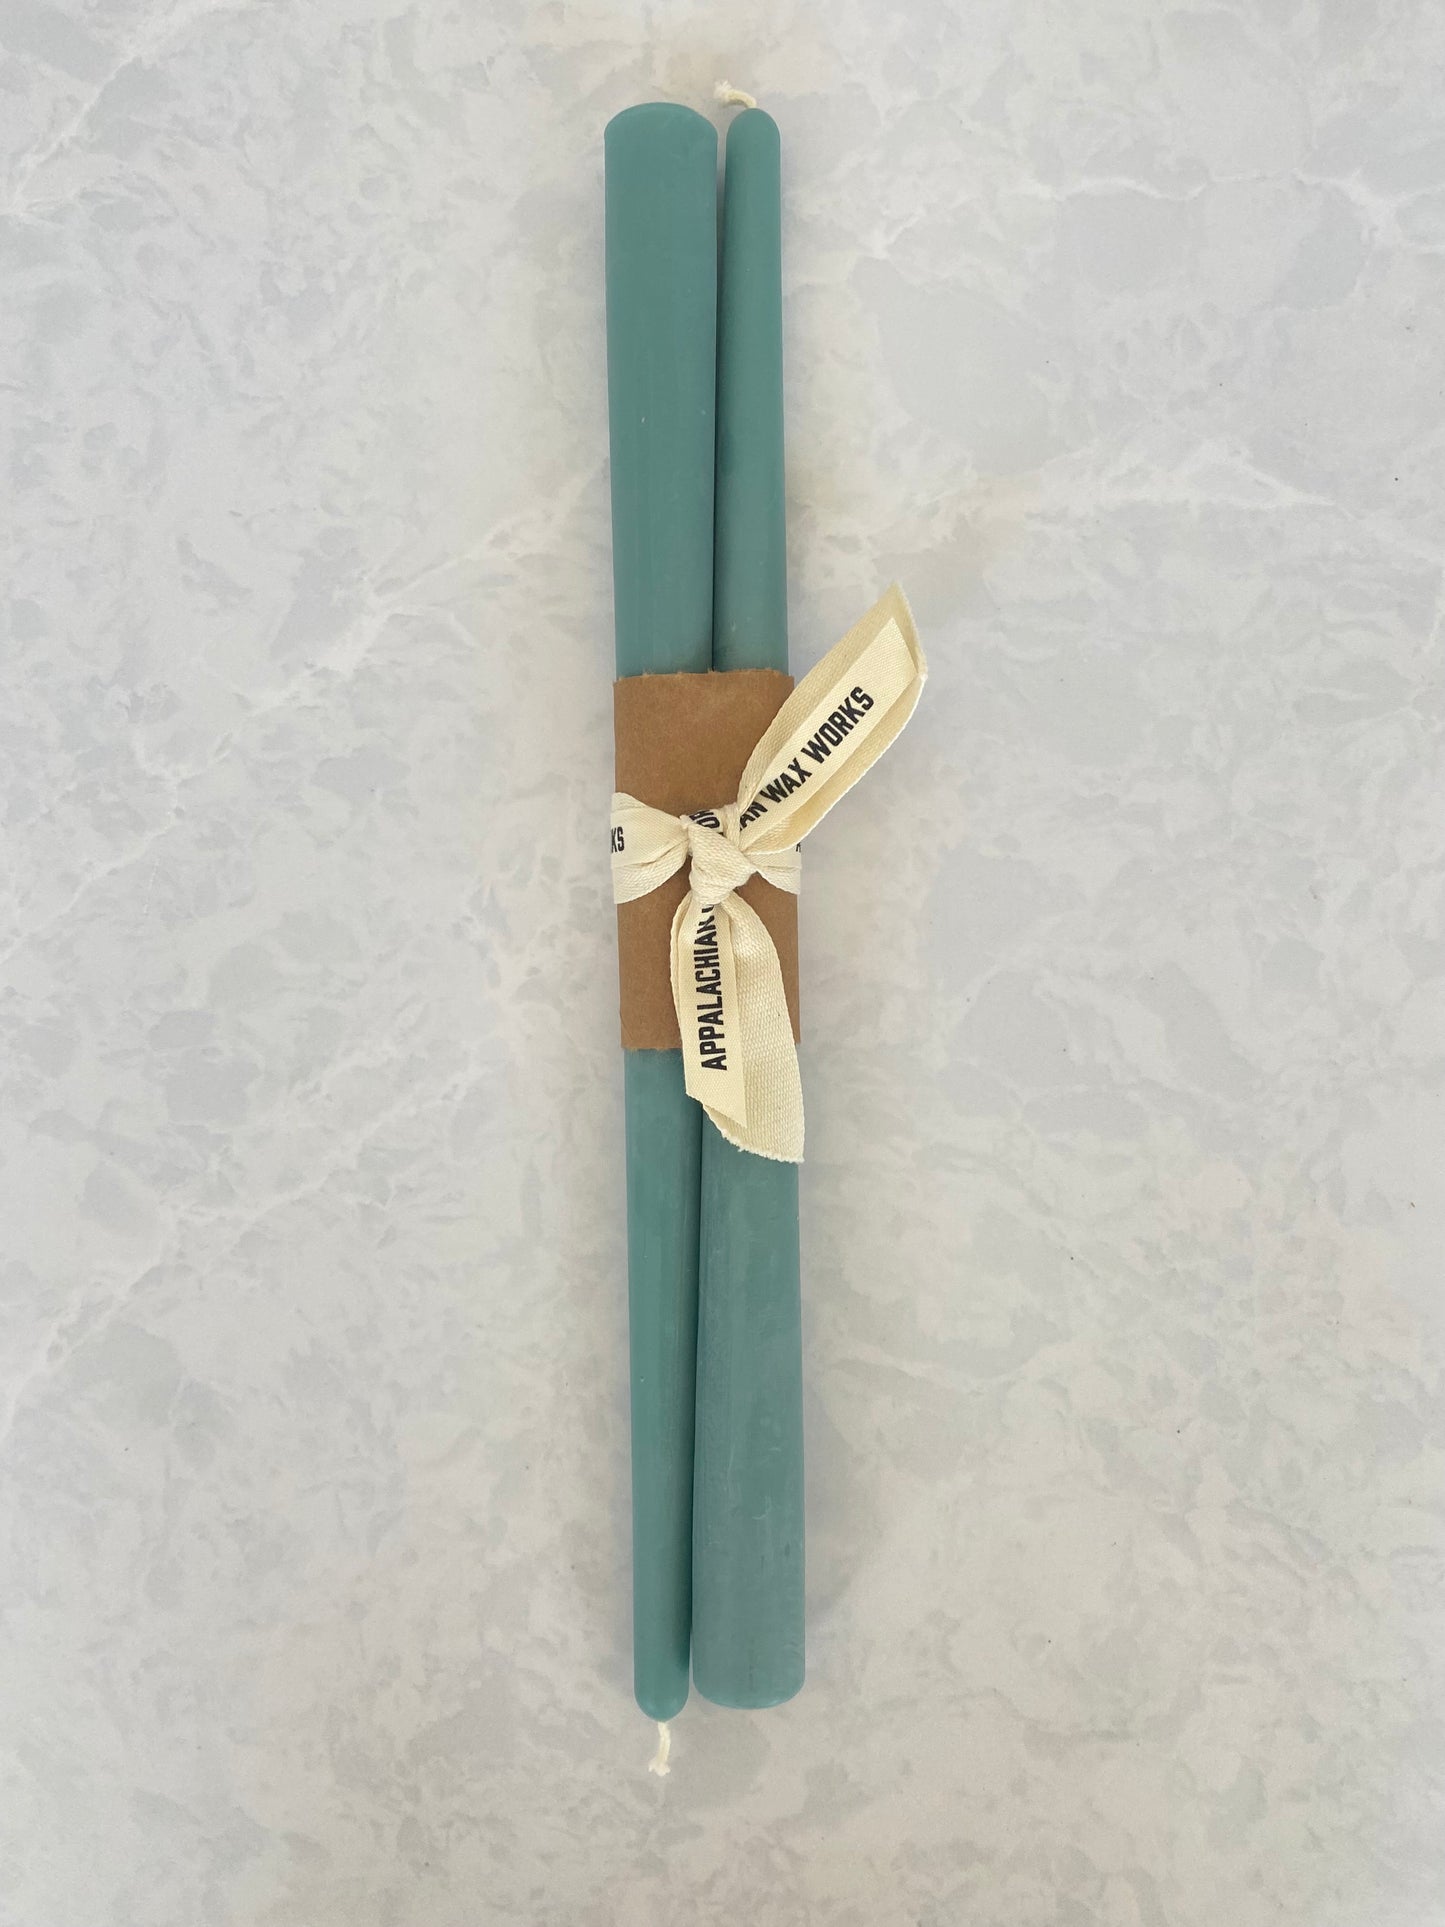 Beeswax taper Candle 12 inch in Teal Blue Color for Sale